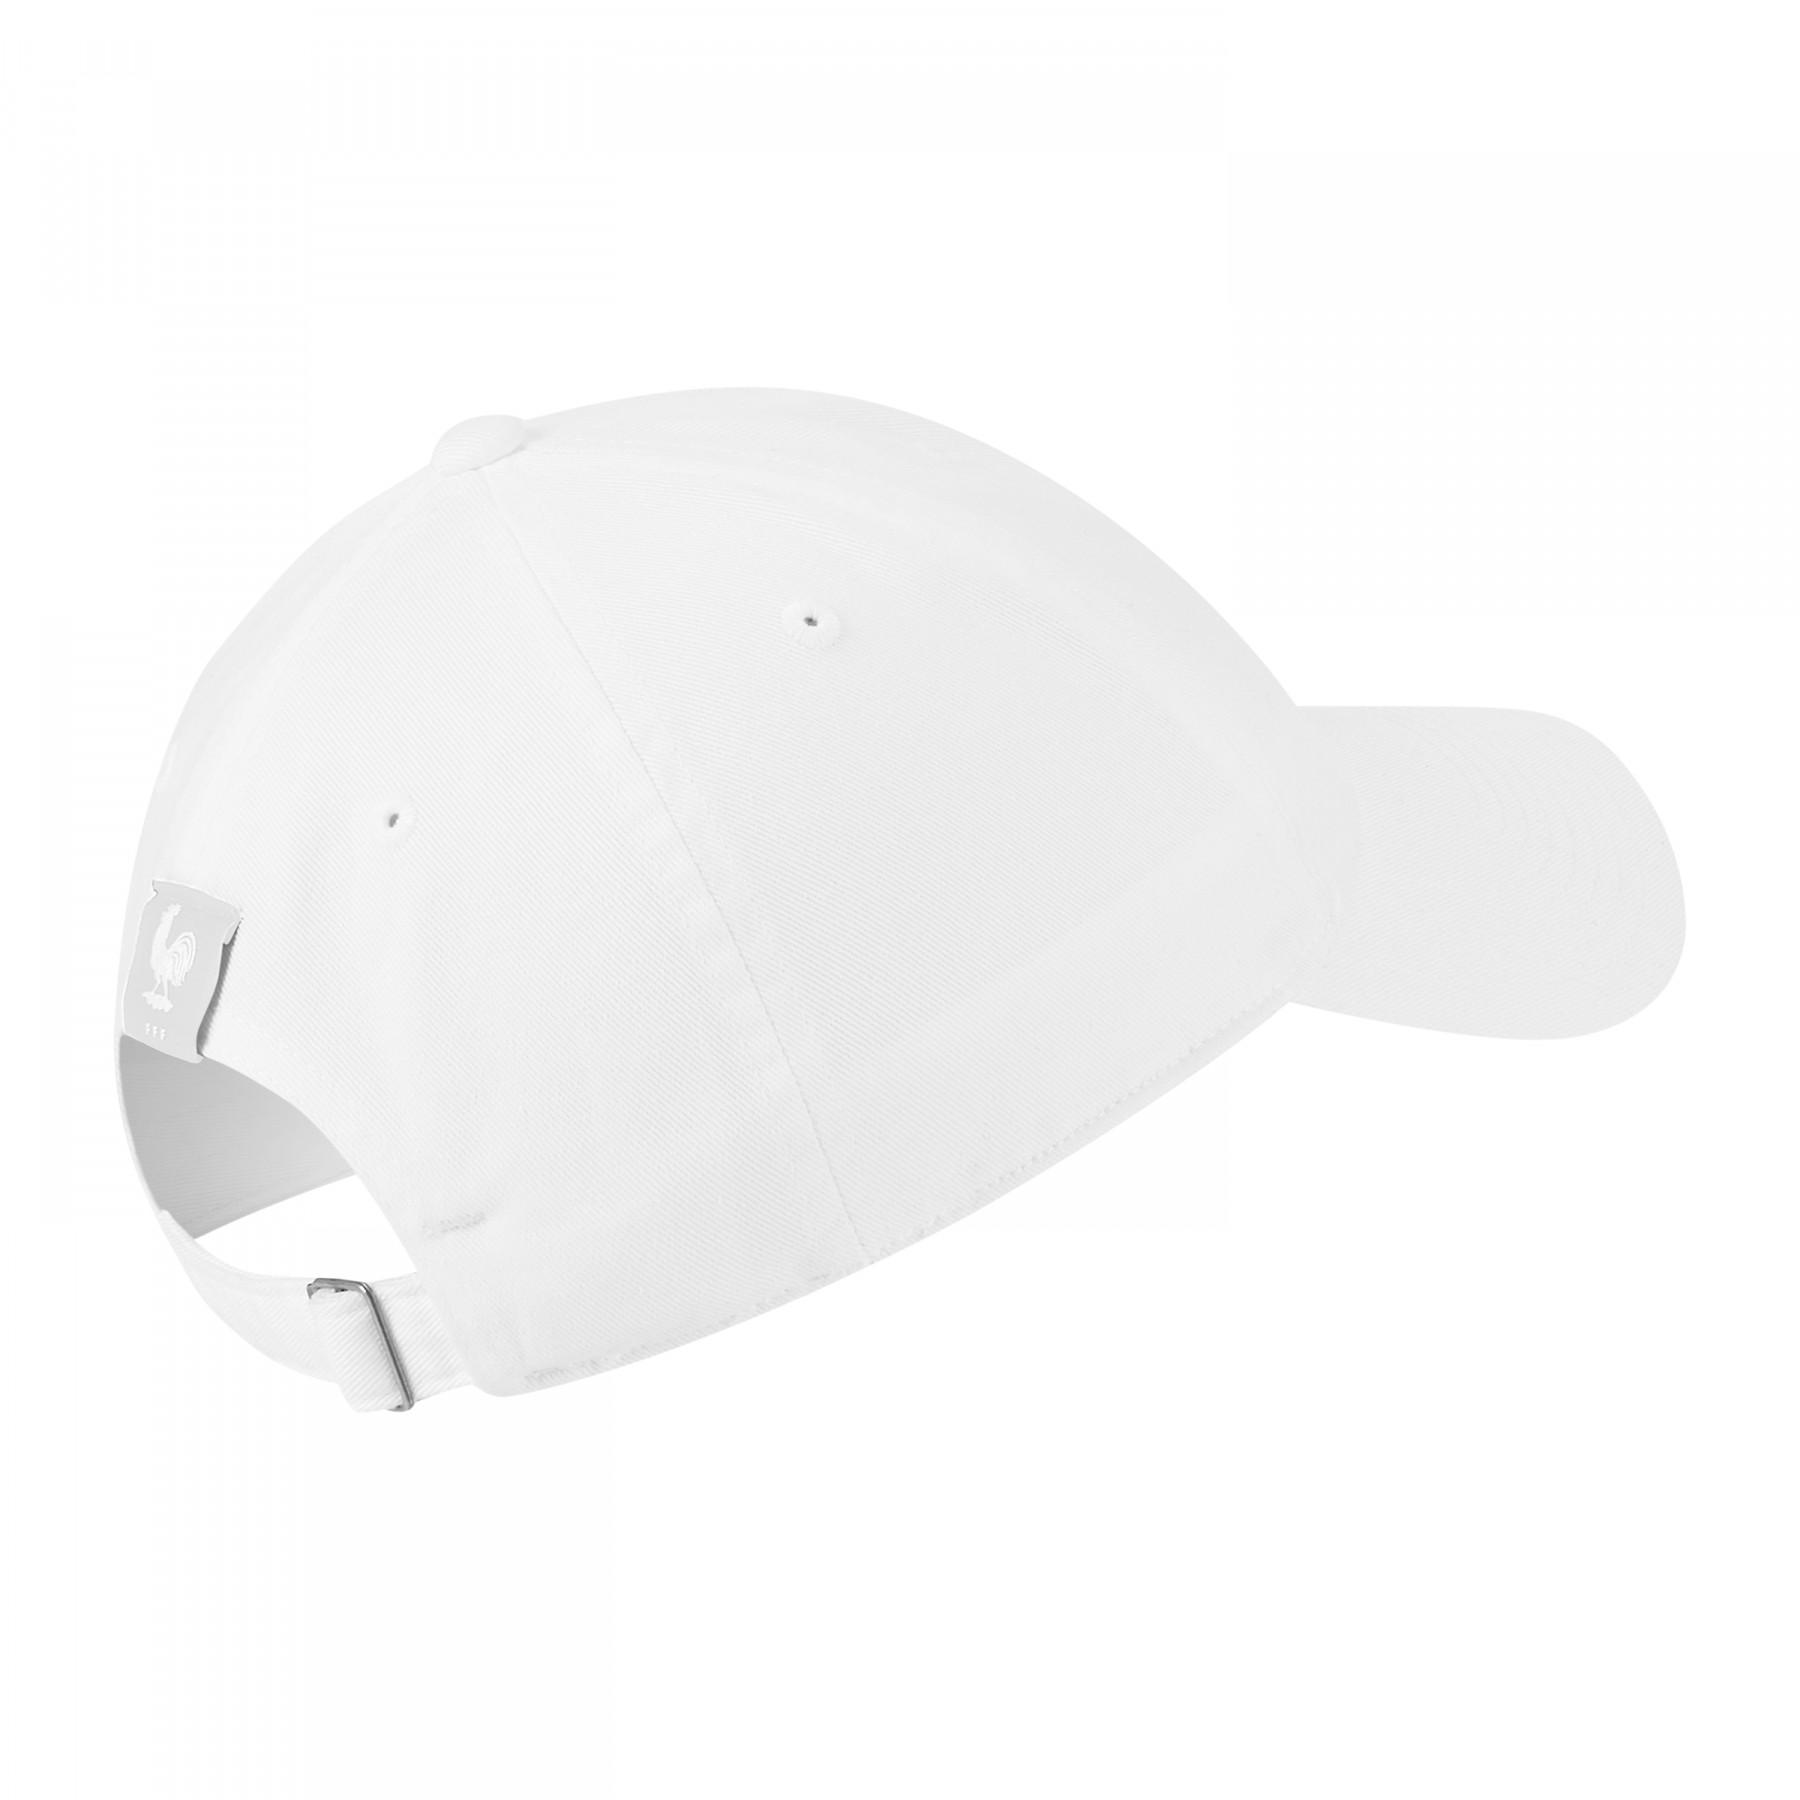 Casquette France Dry H86